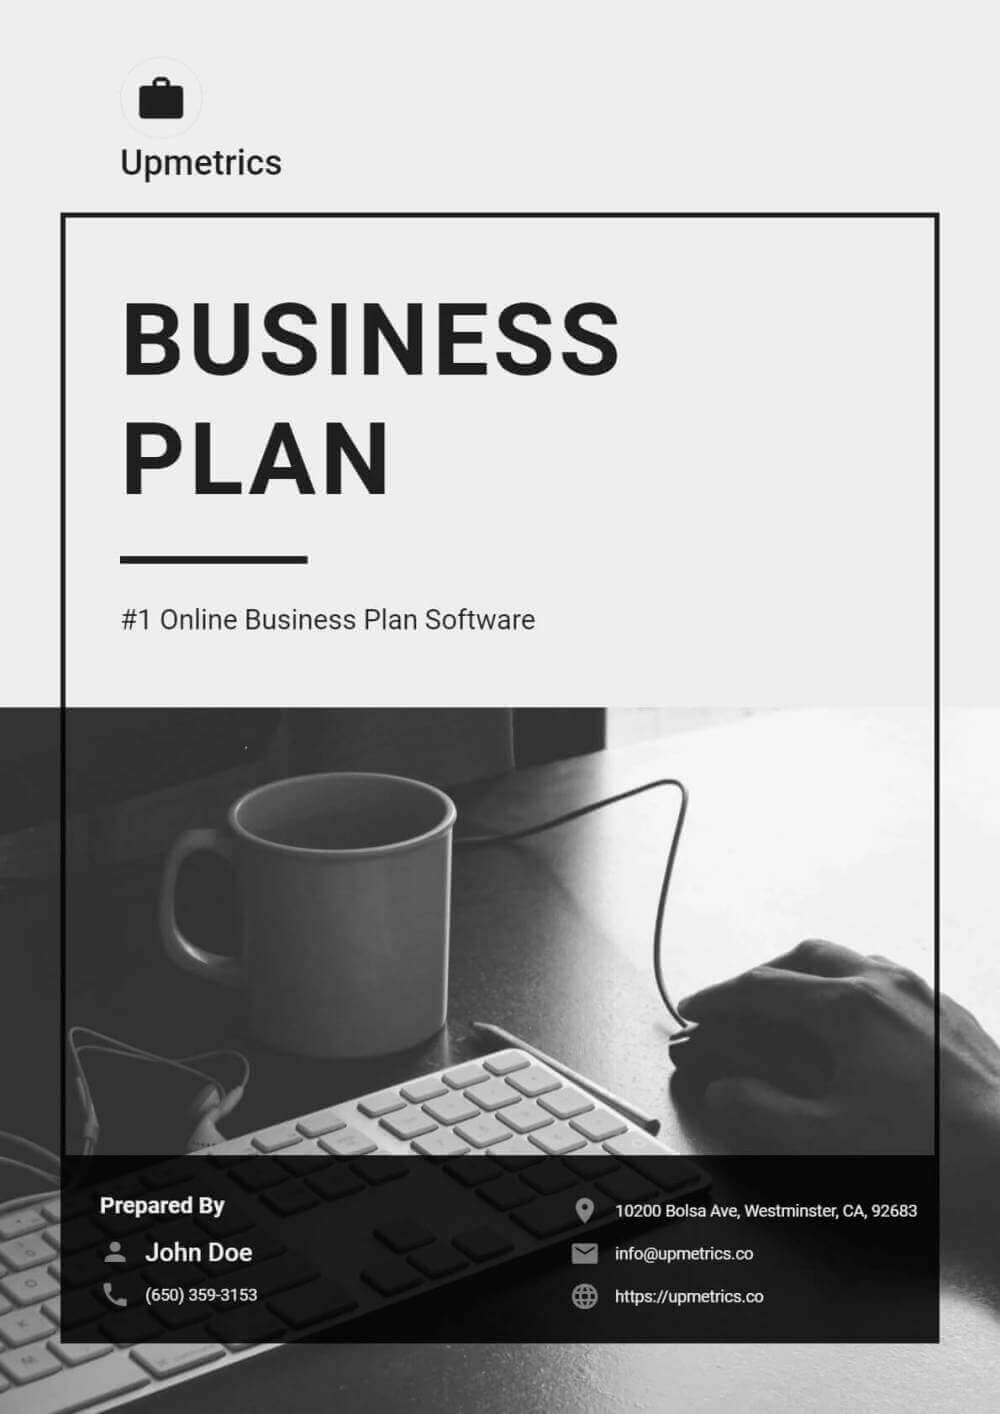 How to Design a Cover Page for a Business Plan? [2022 Updated]